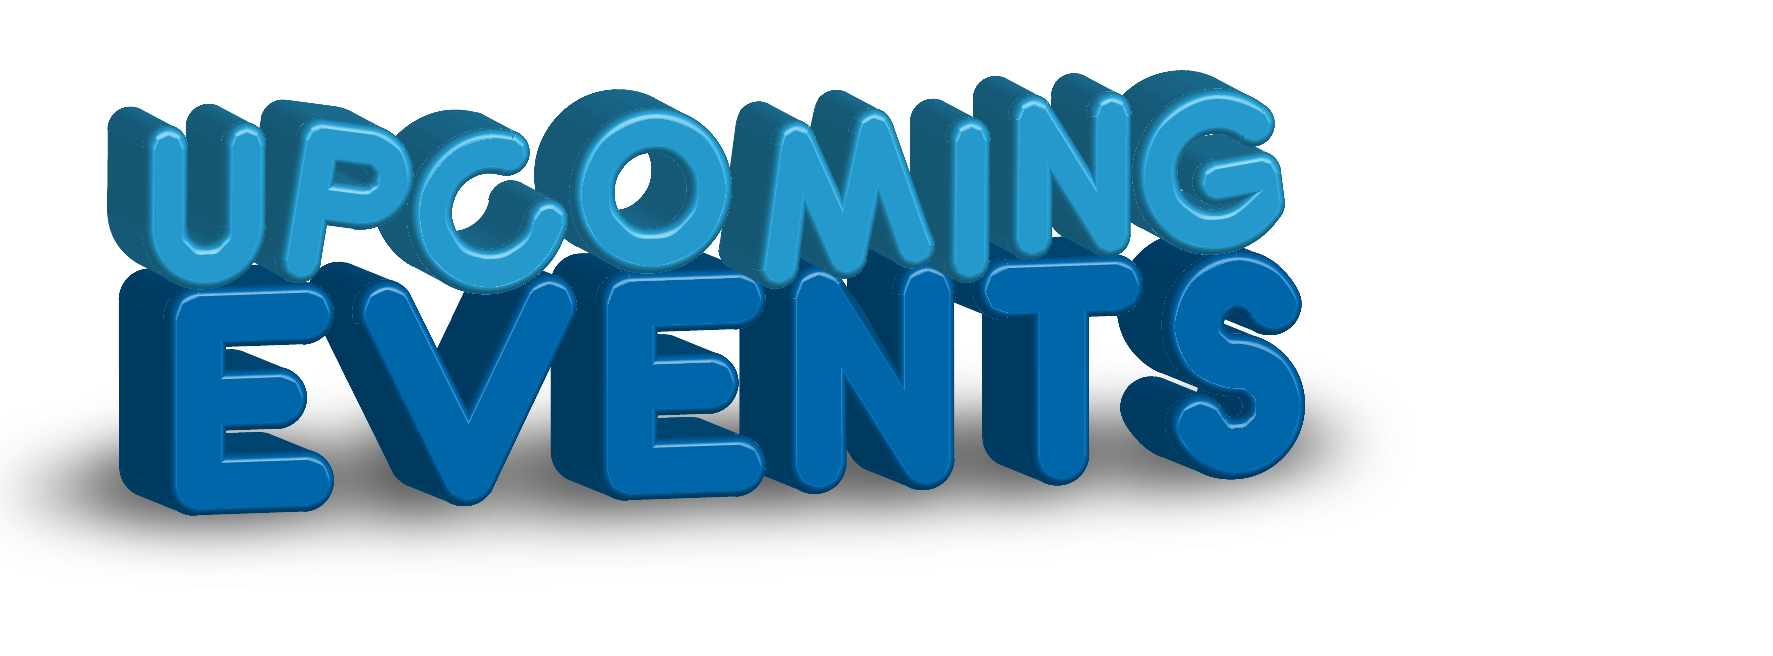 ... Upcoming Events Clipart. 